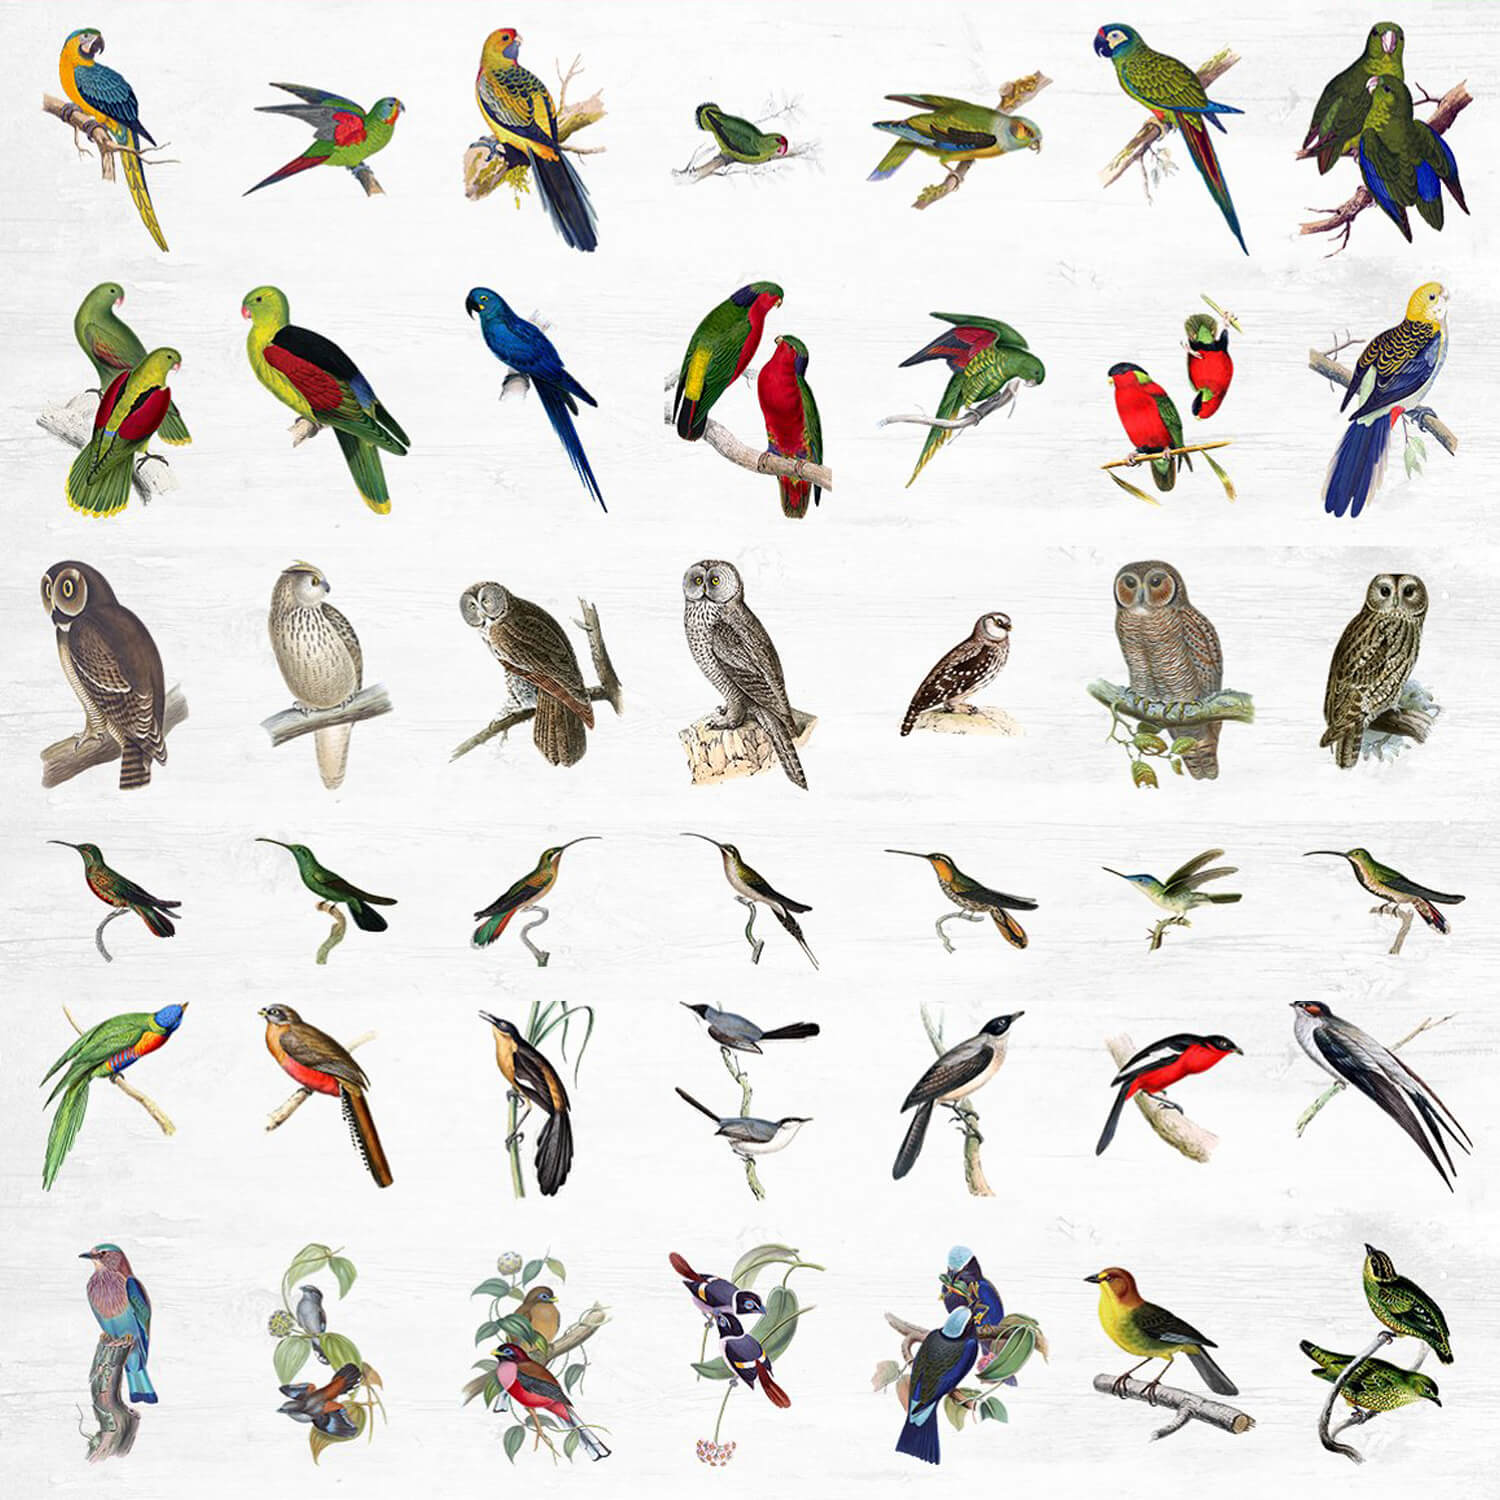 Forty-two illustrations of birds of different species.